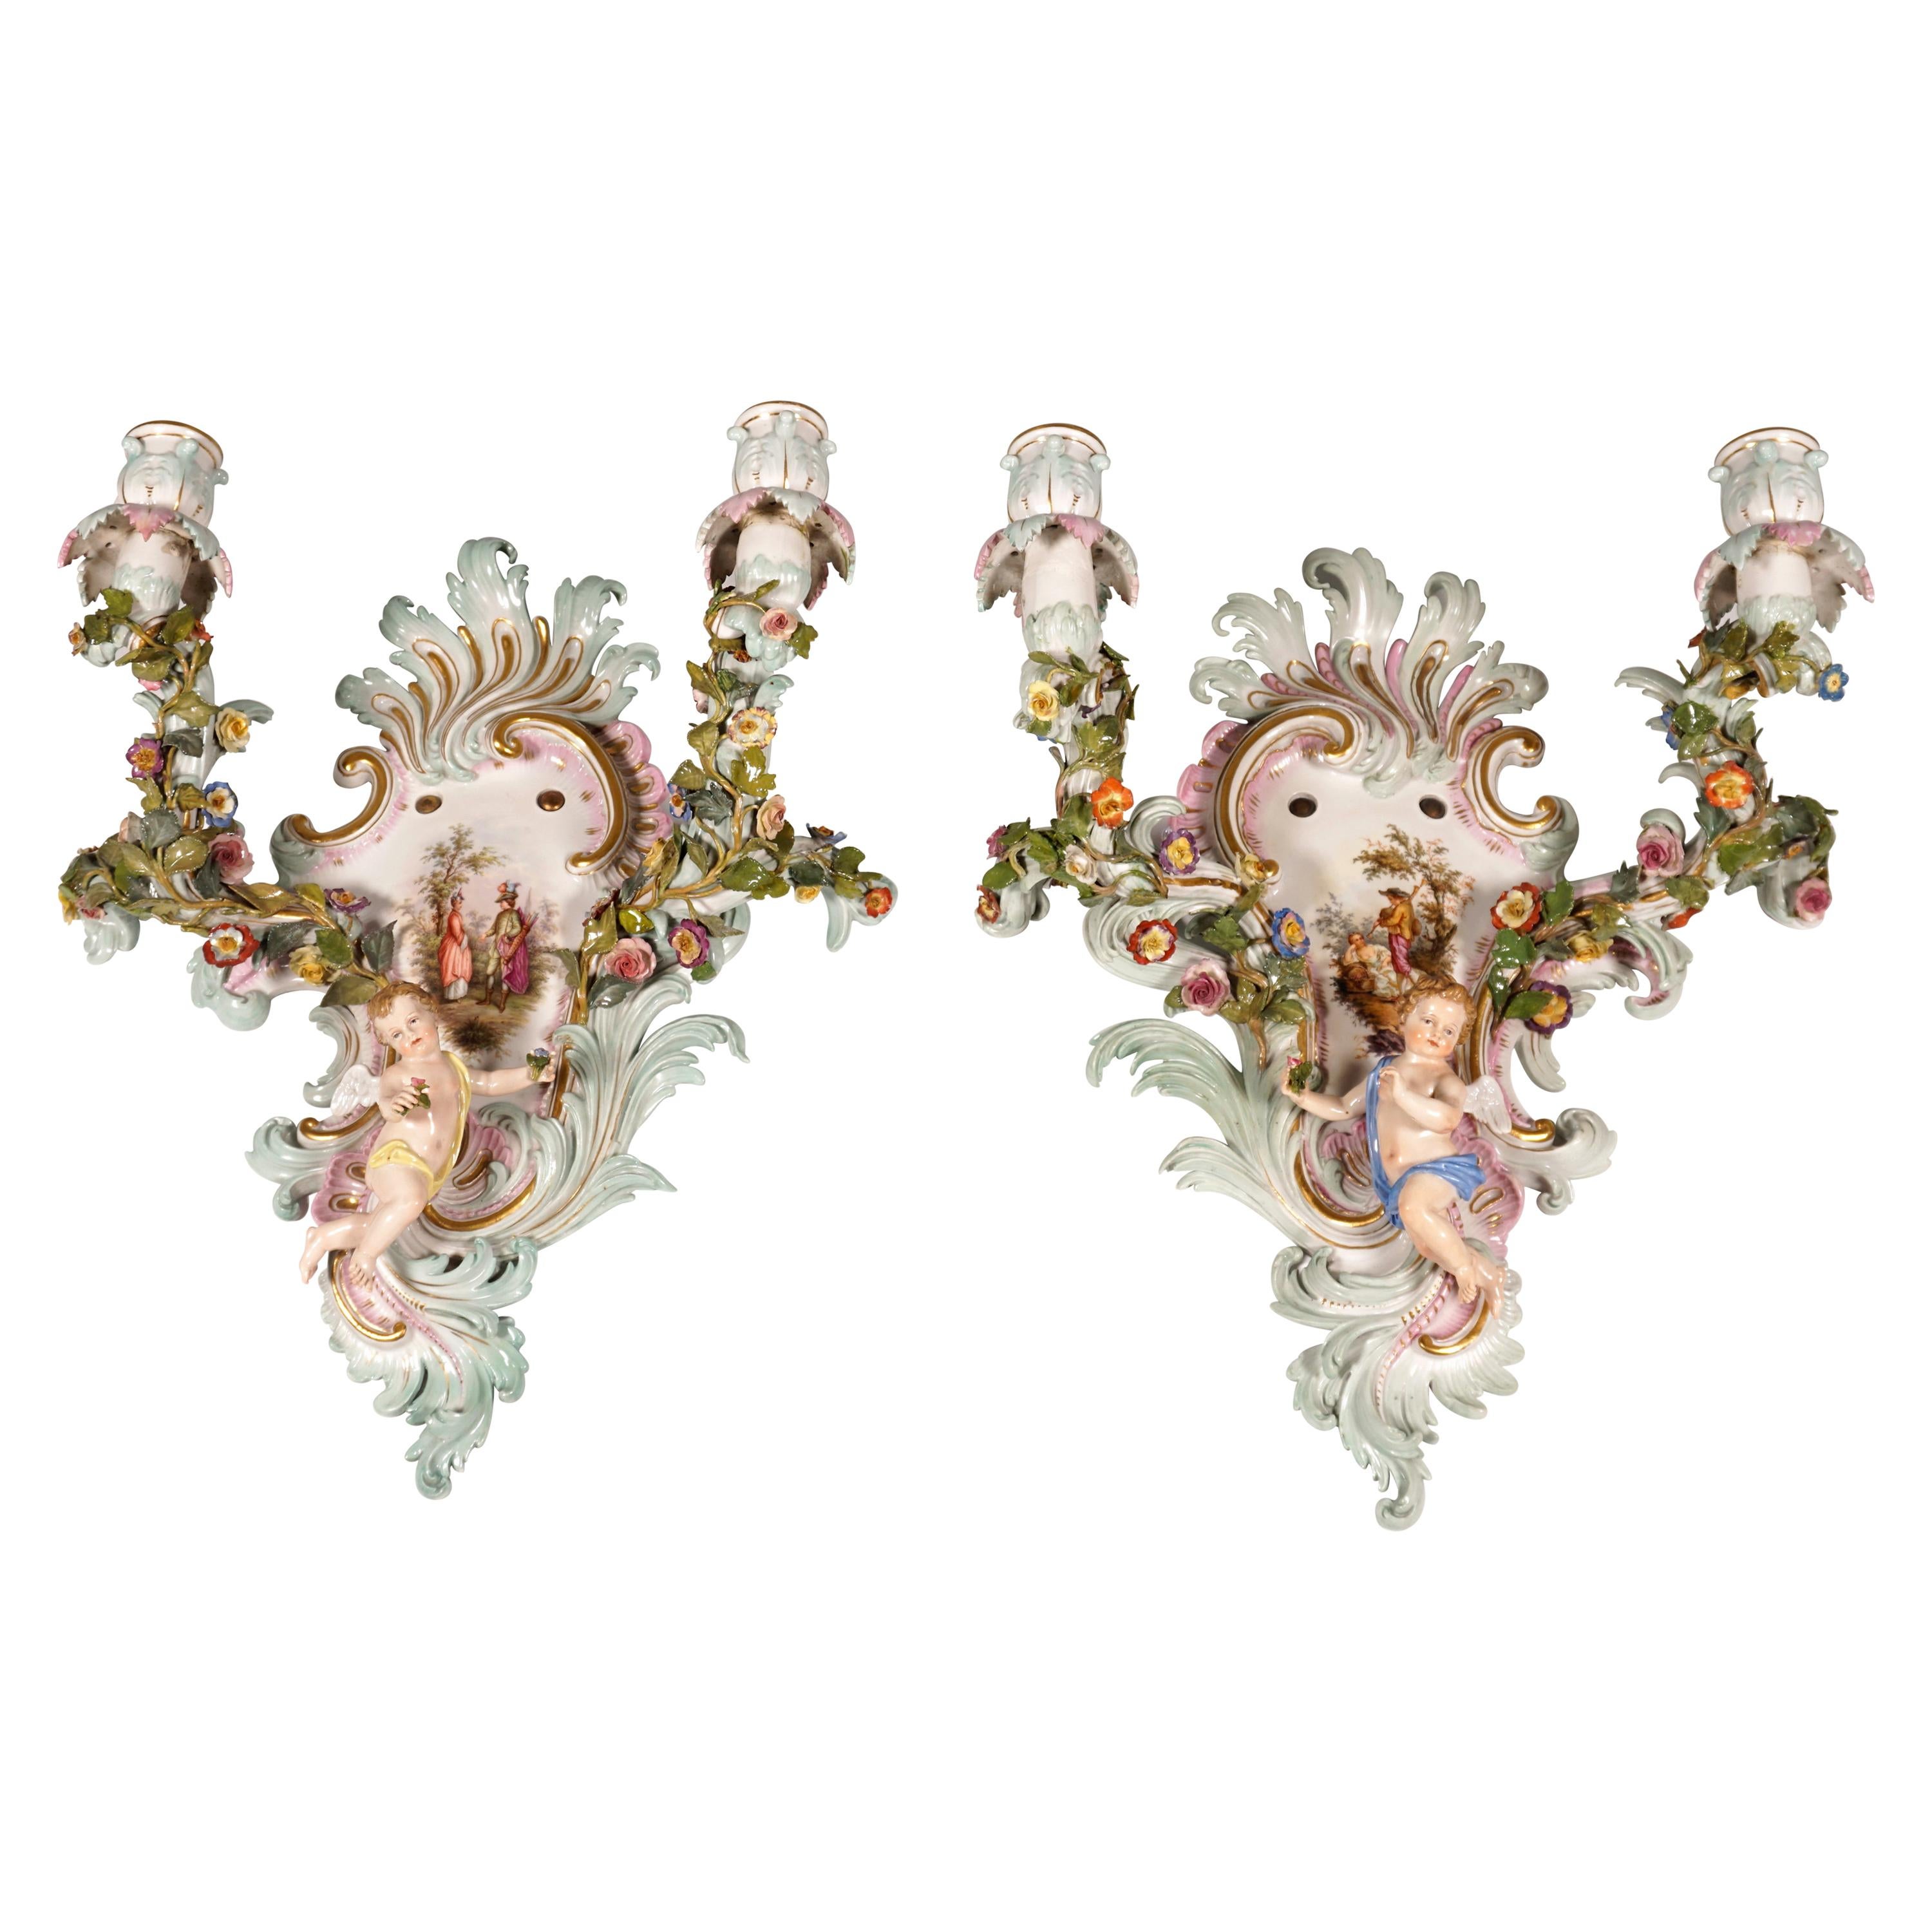 Meissen Pair of Sconces with Cupids and Flower Decoration, by Kaendler, ca. 1860